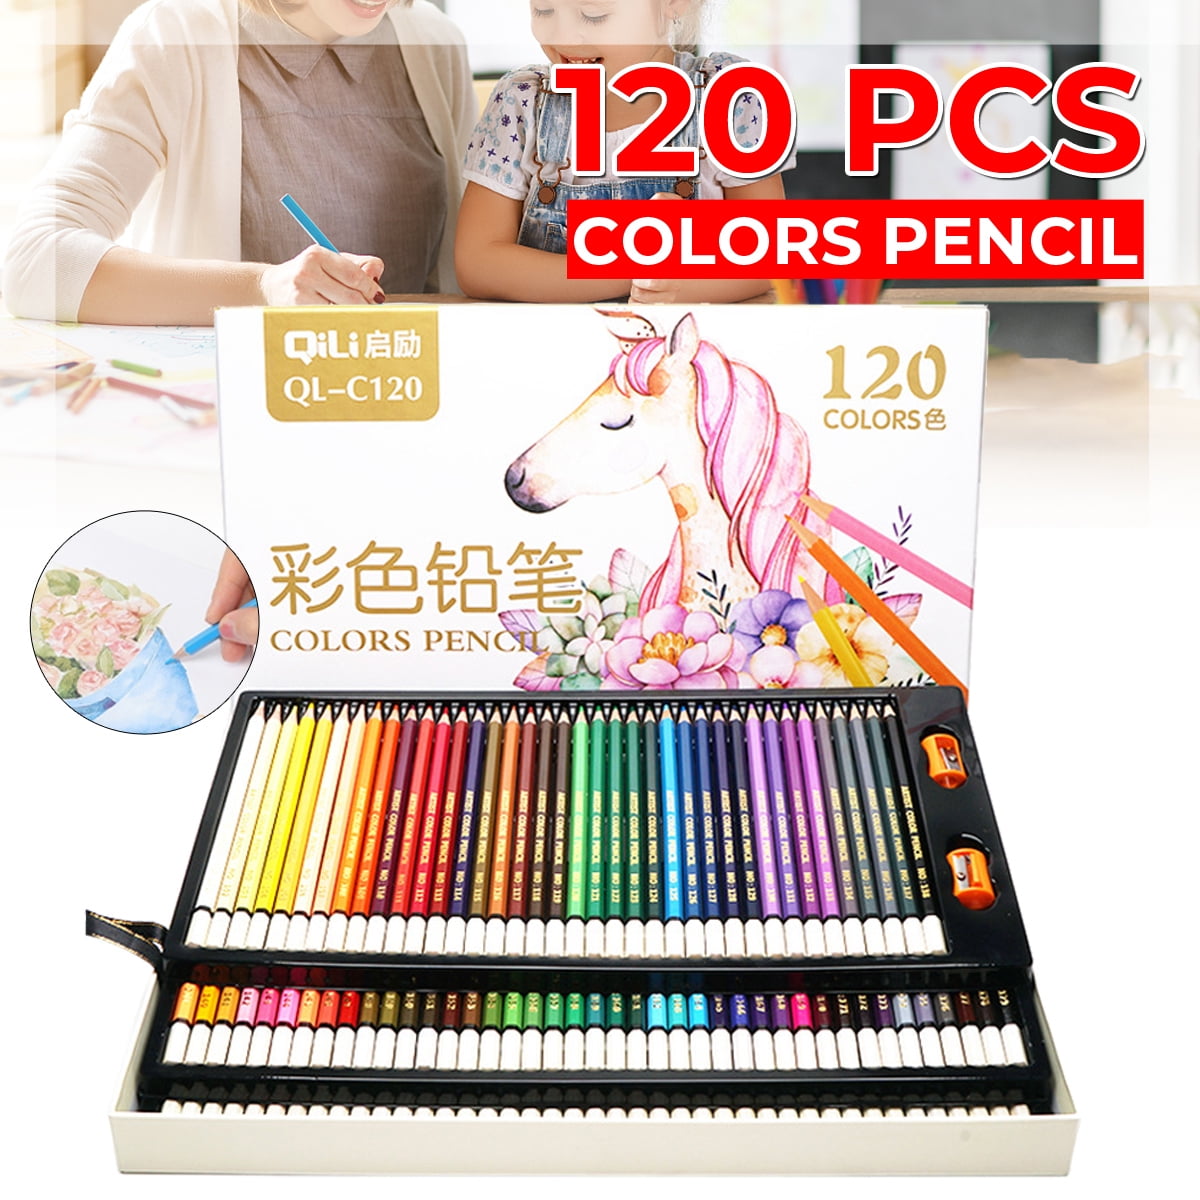 Colored Pencils, Set of 120 Colors, Soft Oil-Based Cores ...